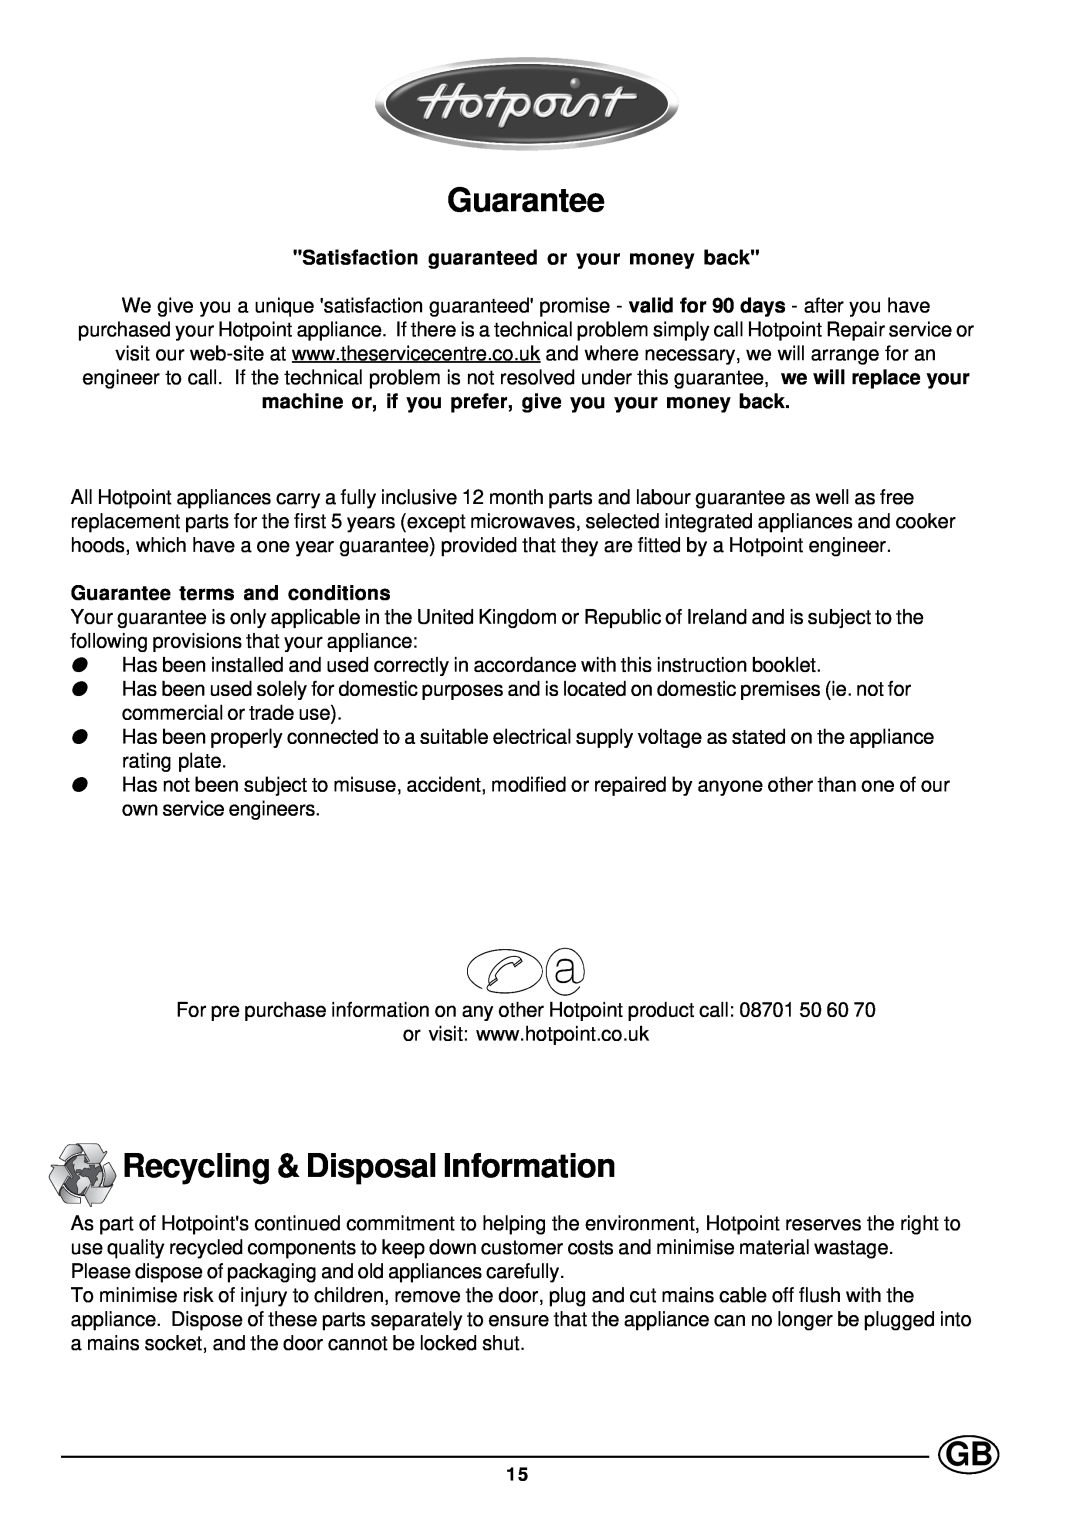 Hotpoint SY11 manual Guarantee, Recycling & Disposal Information, Satisfaction guaranteed or your money back 